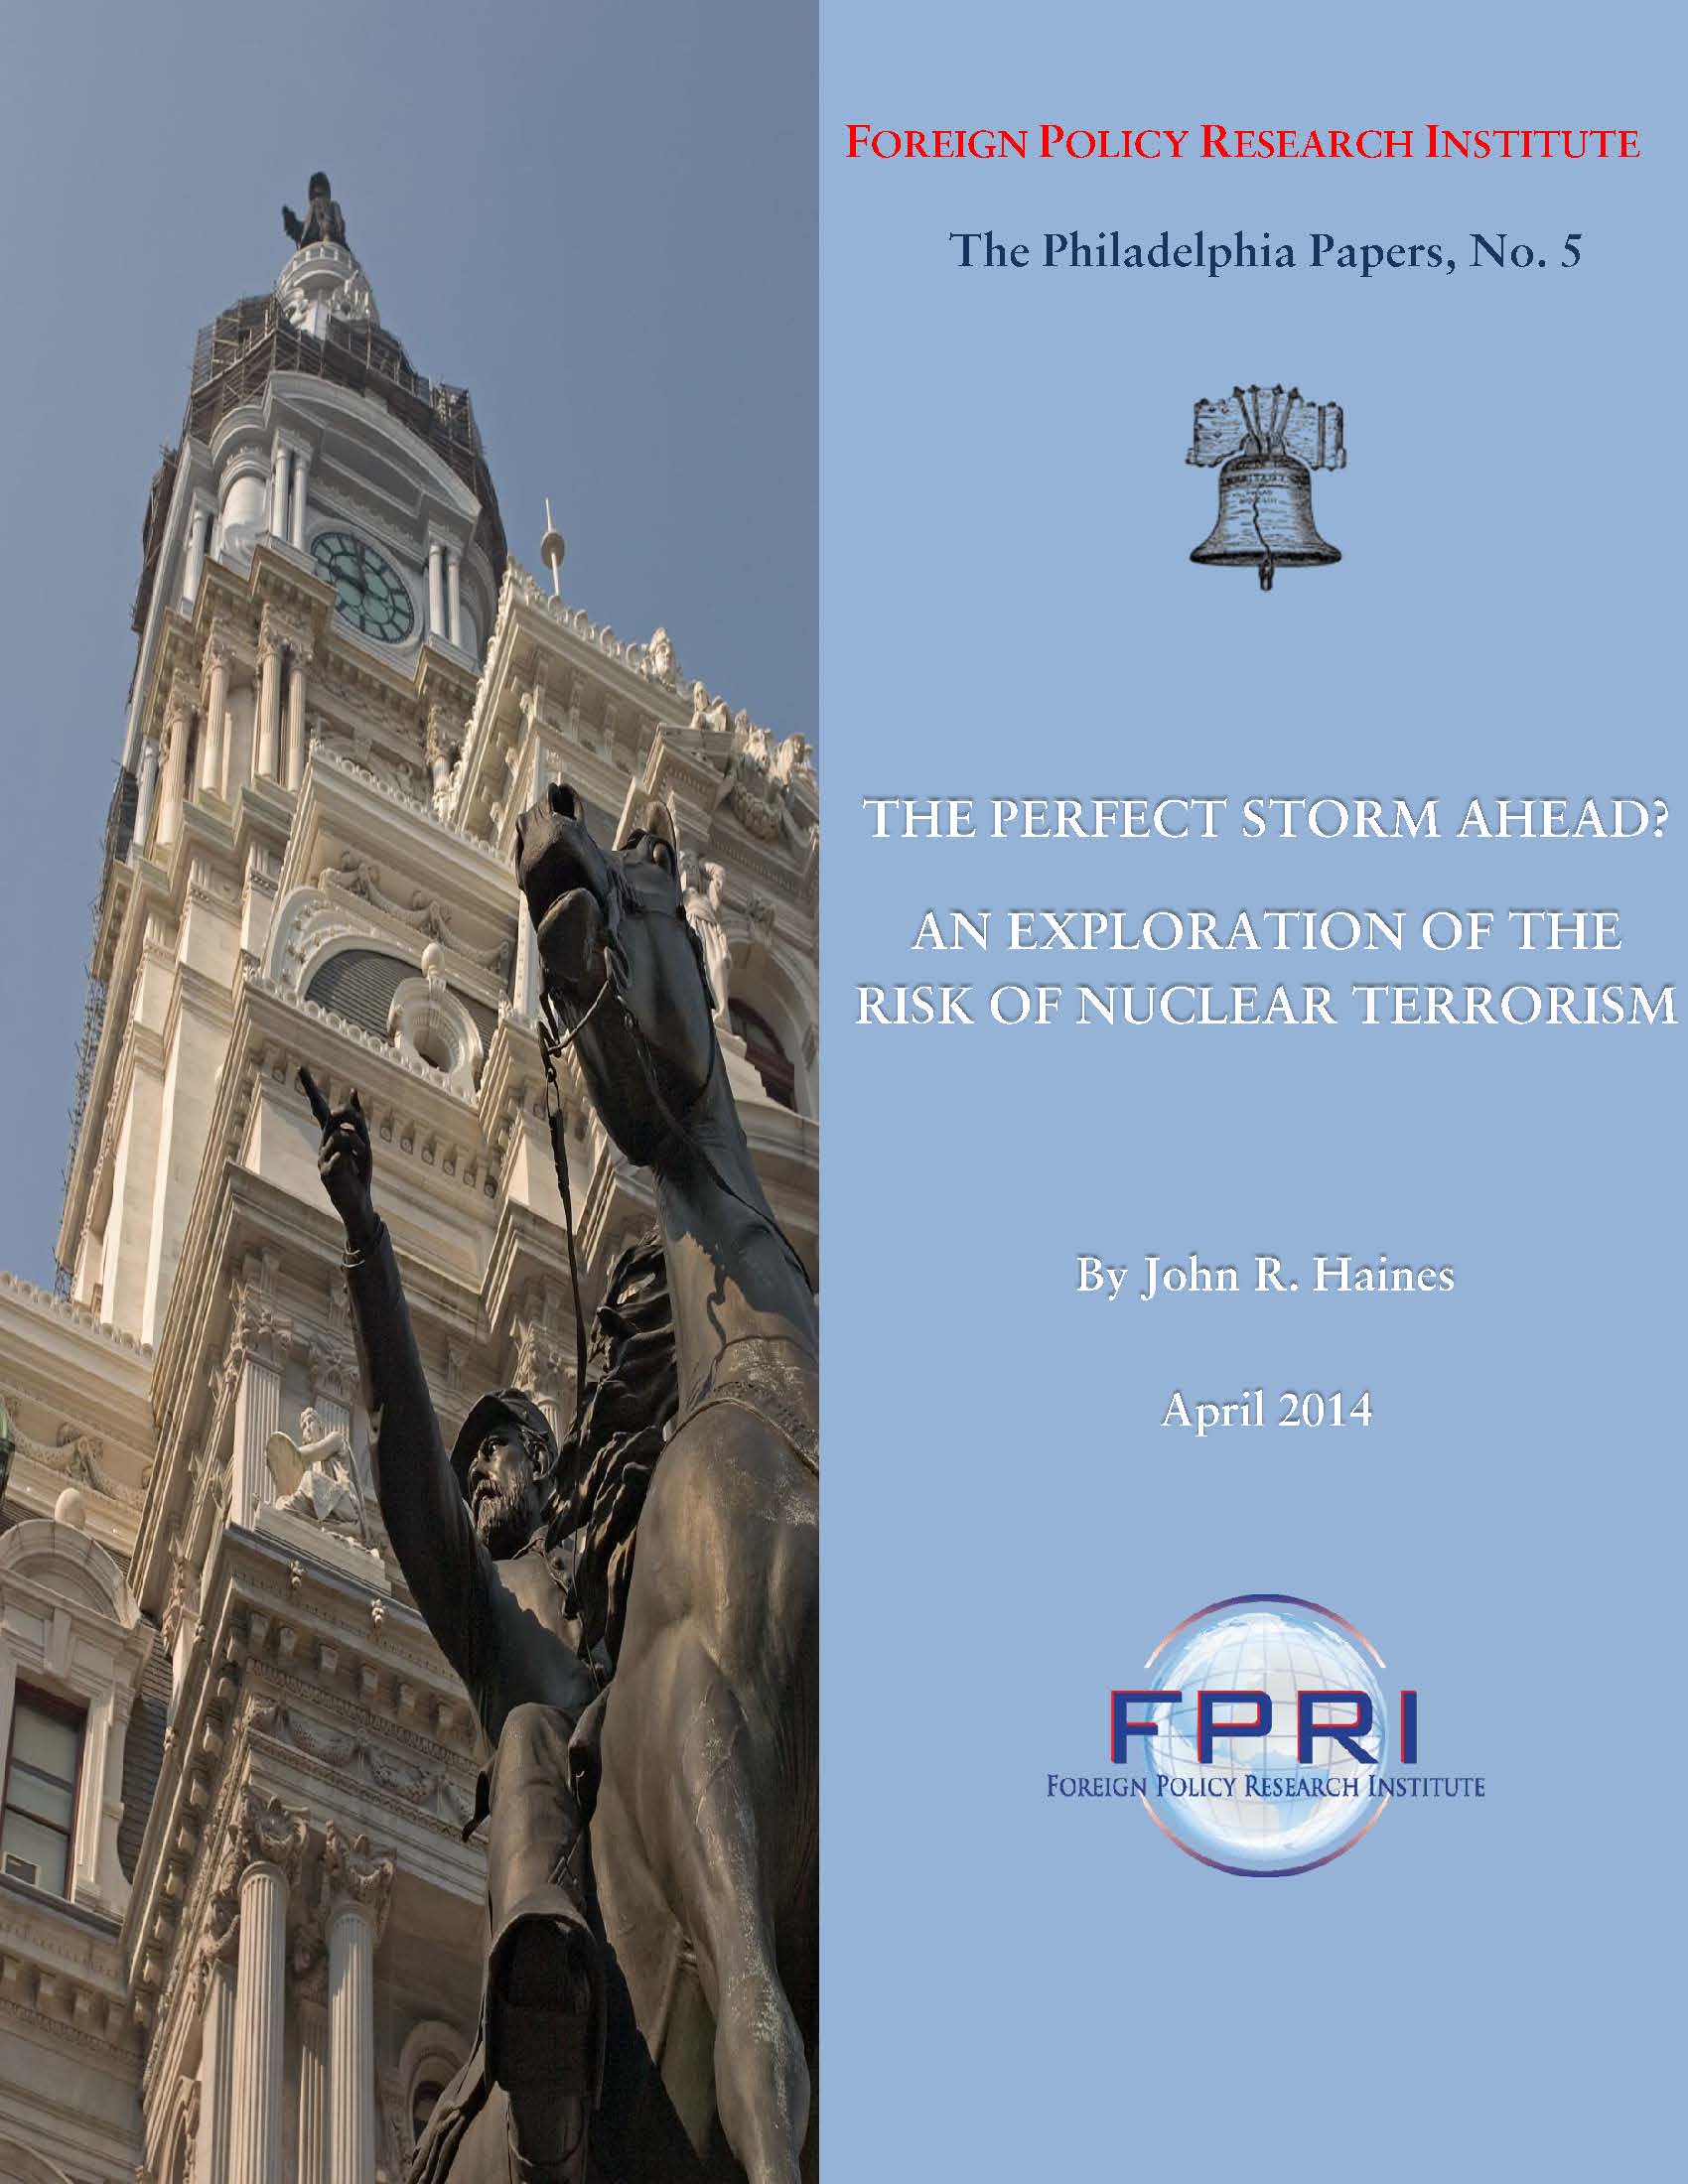 The Perfect Storm Ahead? An Exploration of the Risk of Nuclear Terrorism